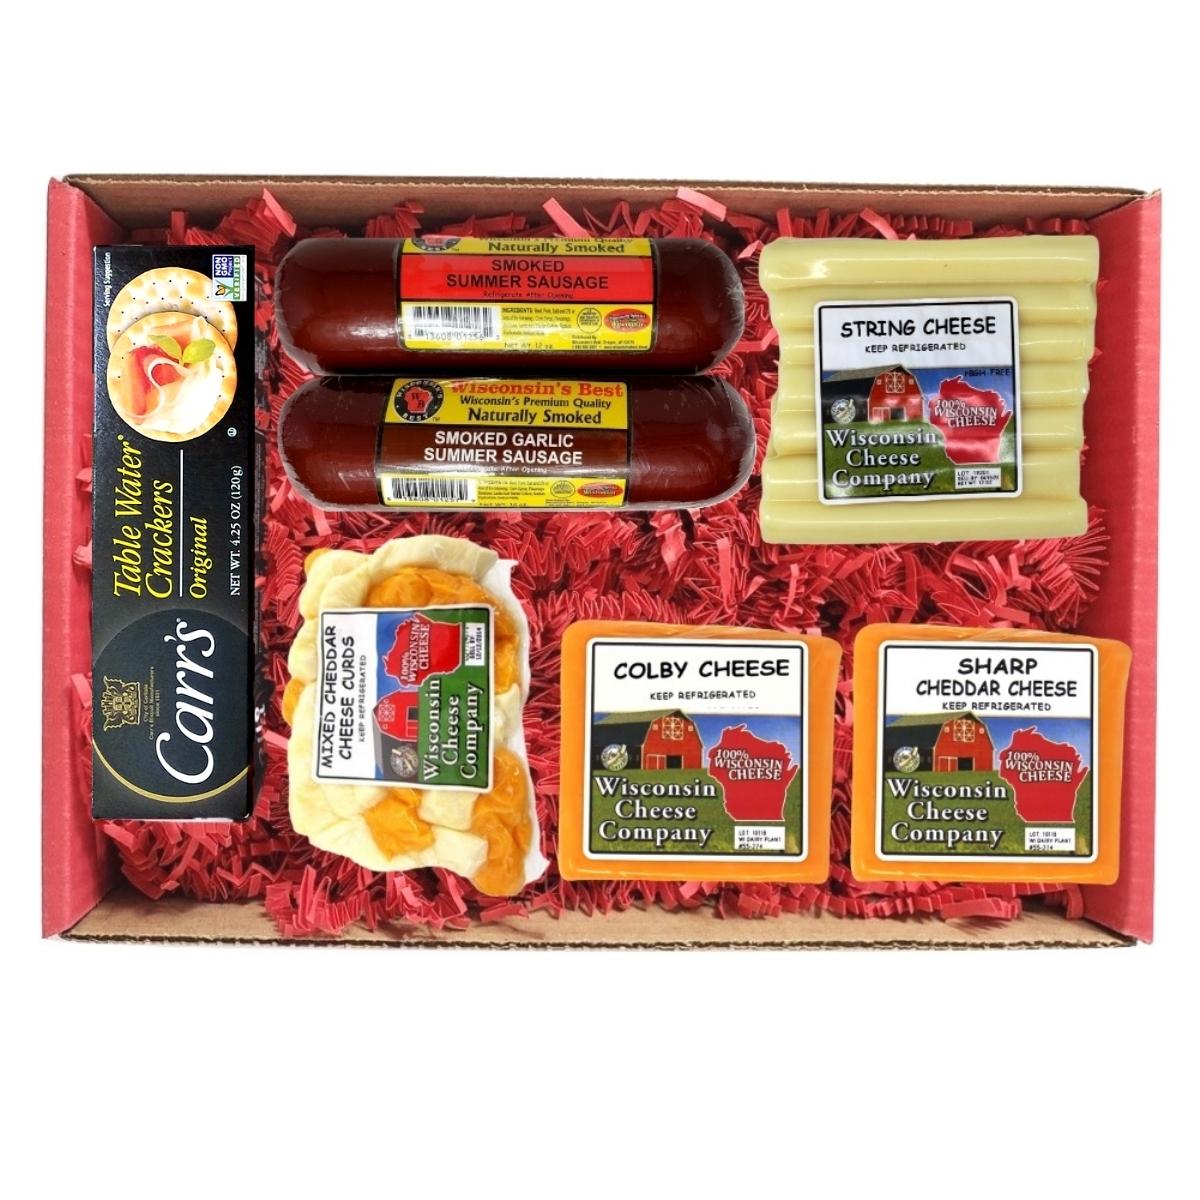 Gourmet gift box with crackers, cheese, cheese curds, summer sausage